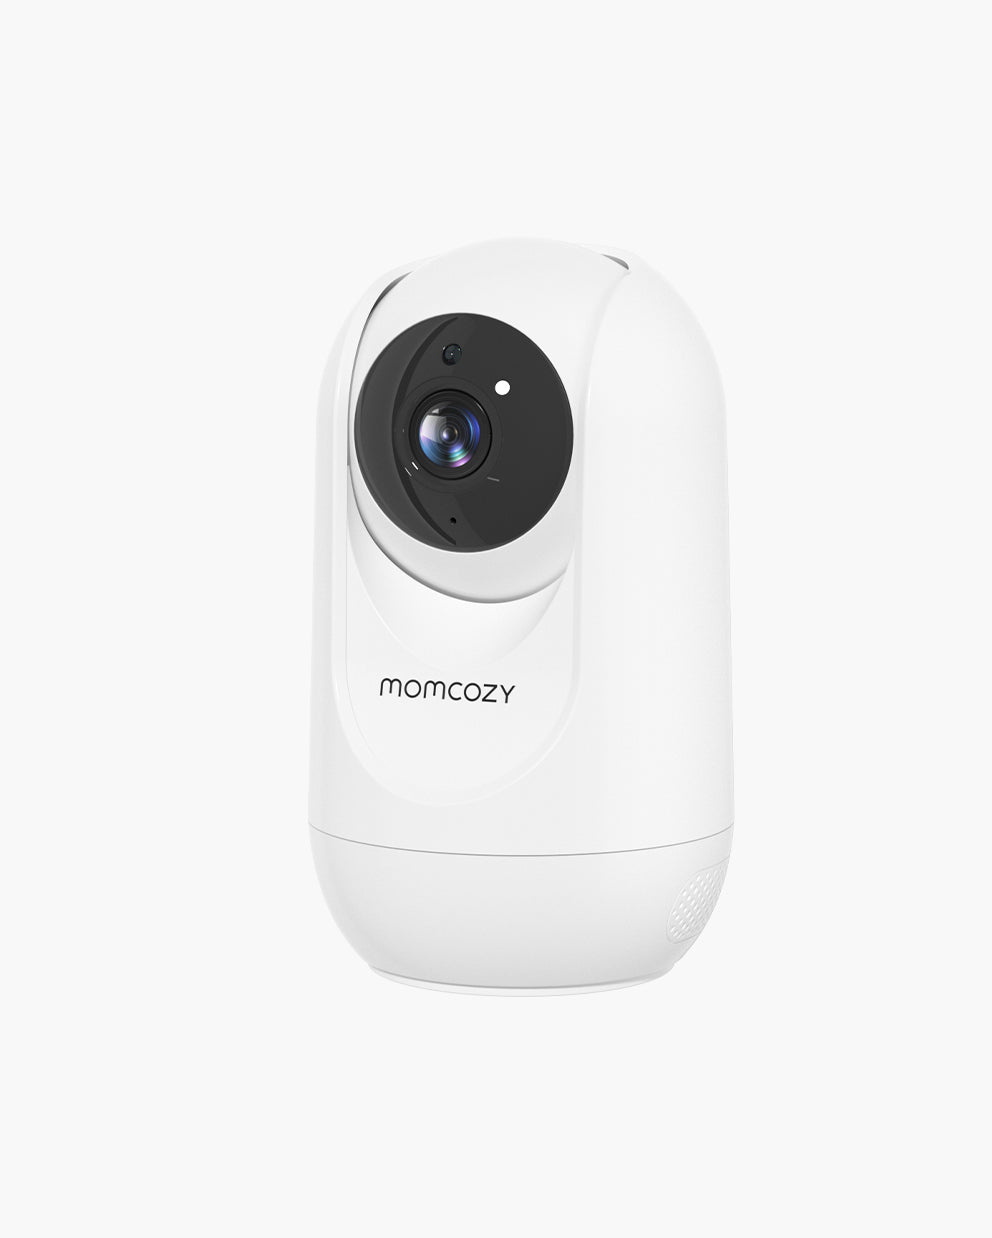 Check out our new MomCozy baby monitor!! ♡☁️👶🏽 it's non Wi-Fi, displ, Monitor